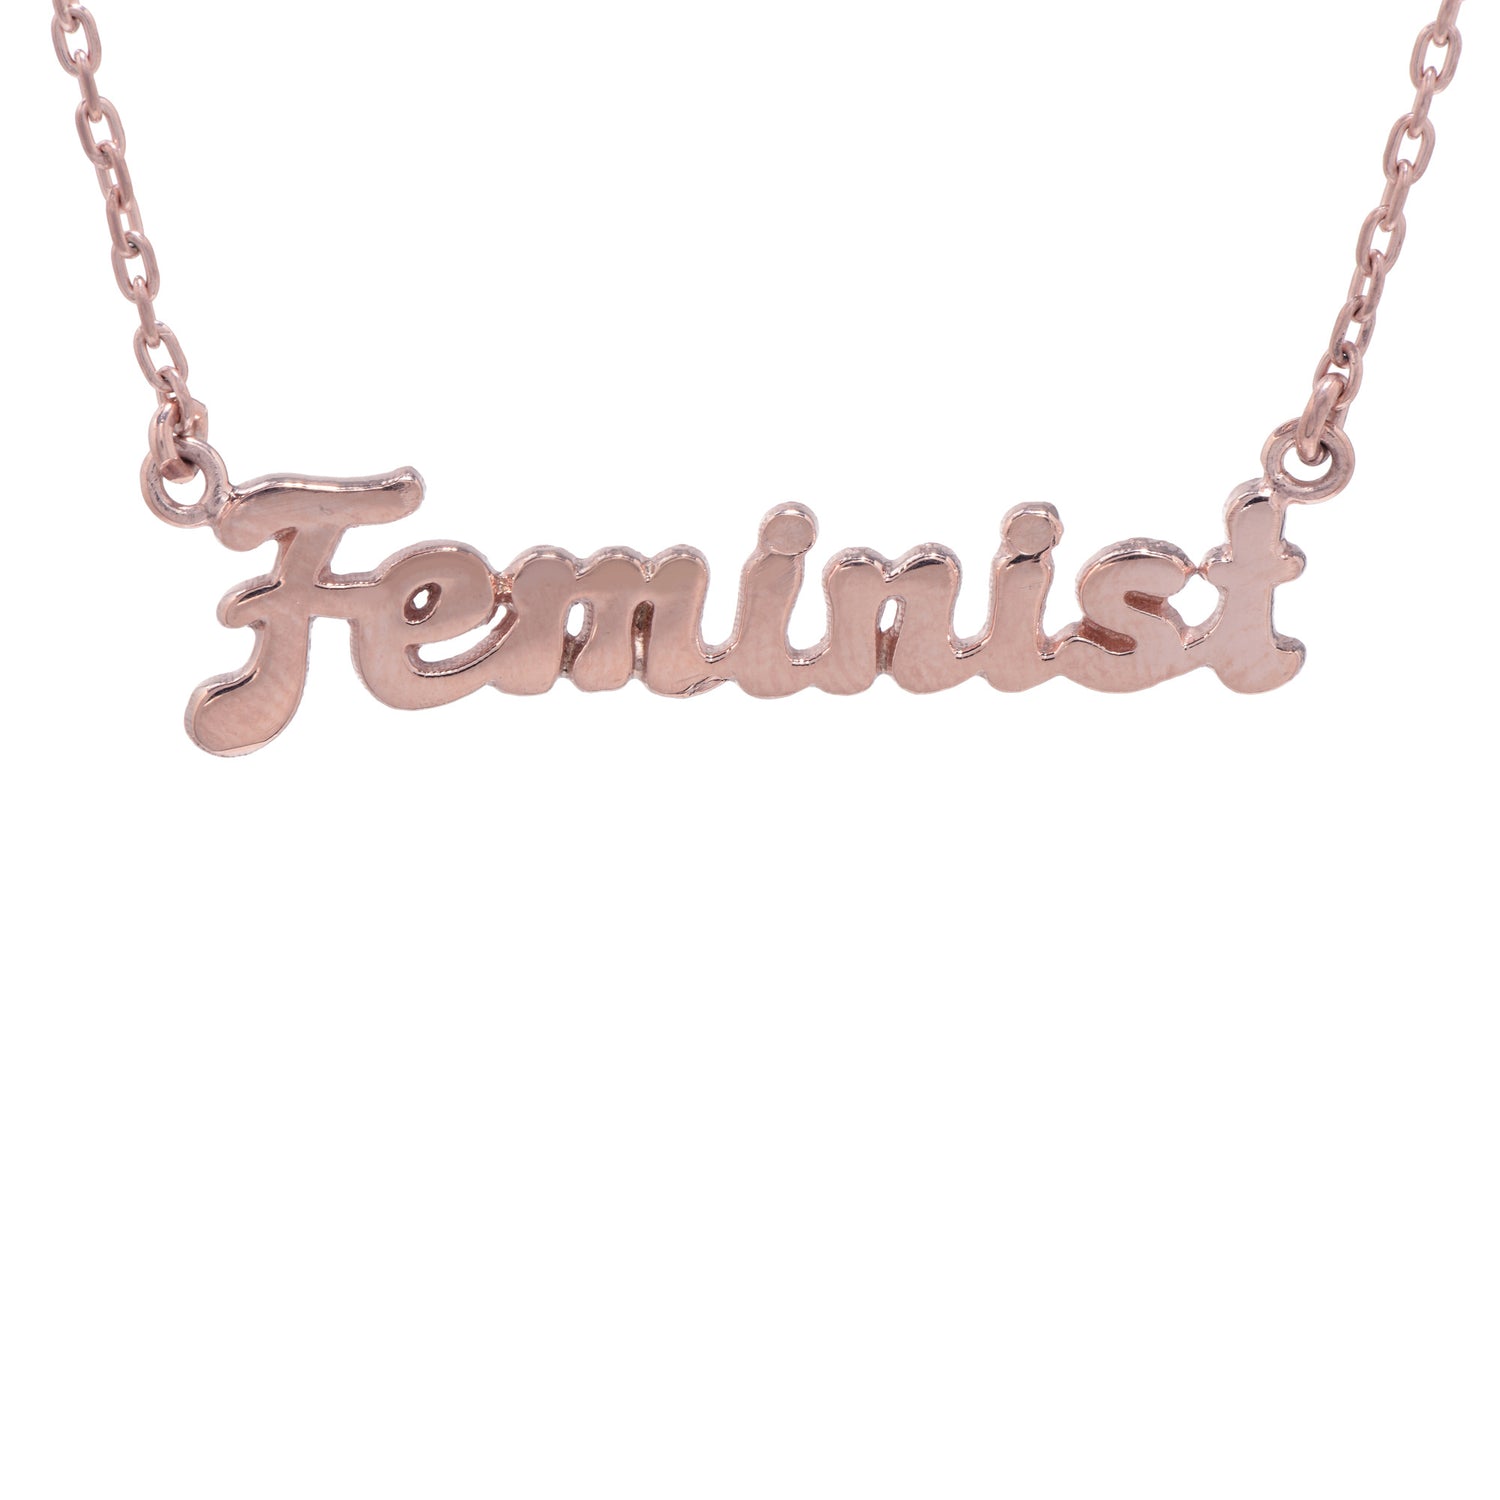 Feminist Necklace (BB x Me & You) - Bing Bang Jewelry NYC